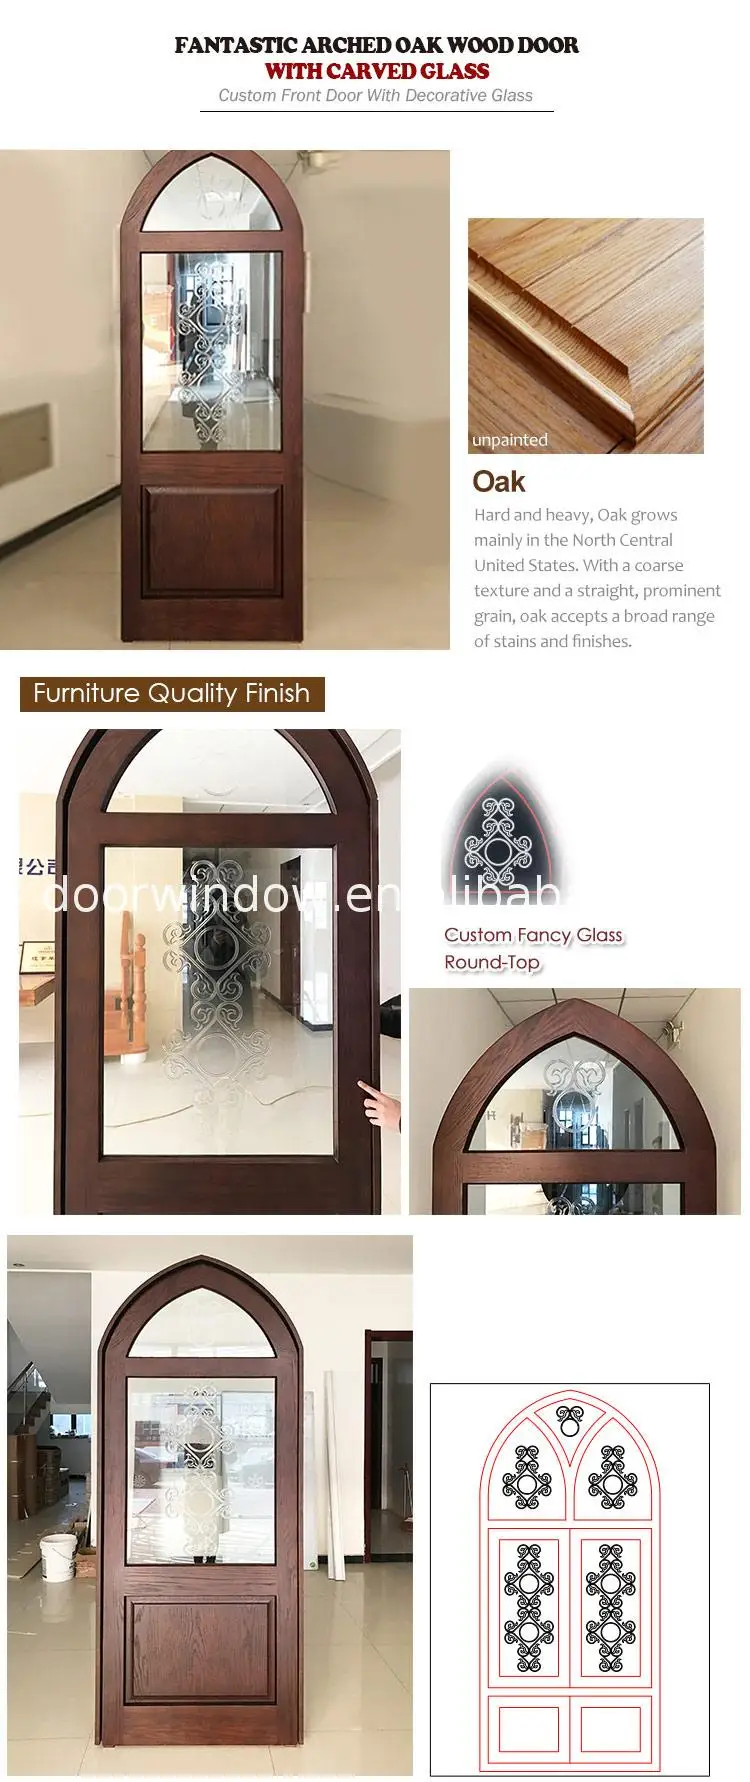 Wholesale price used front entry doors types of glass texas star door